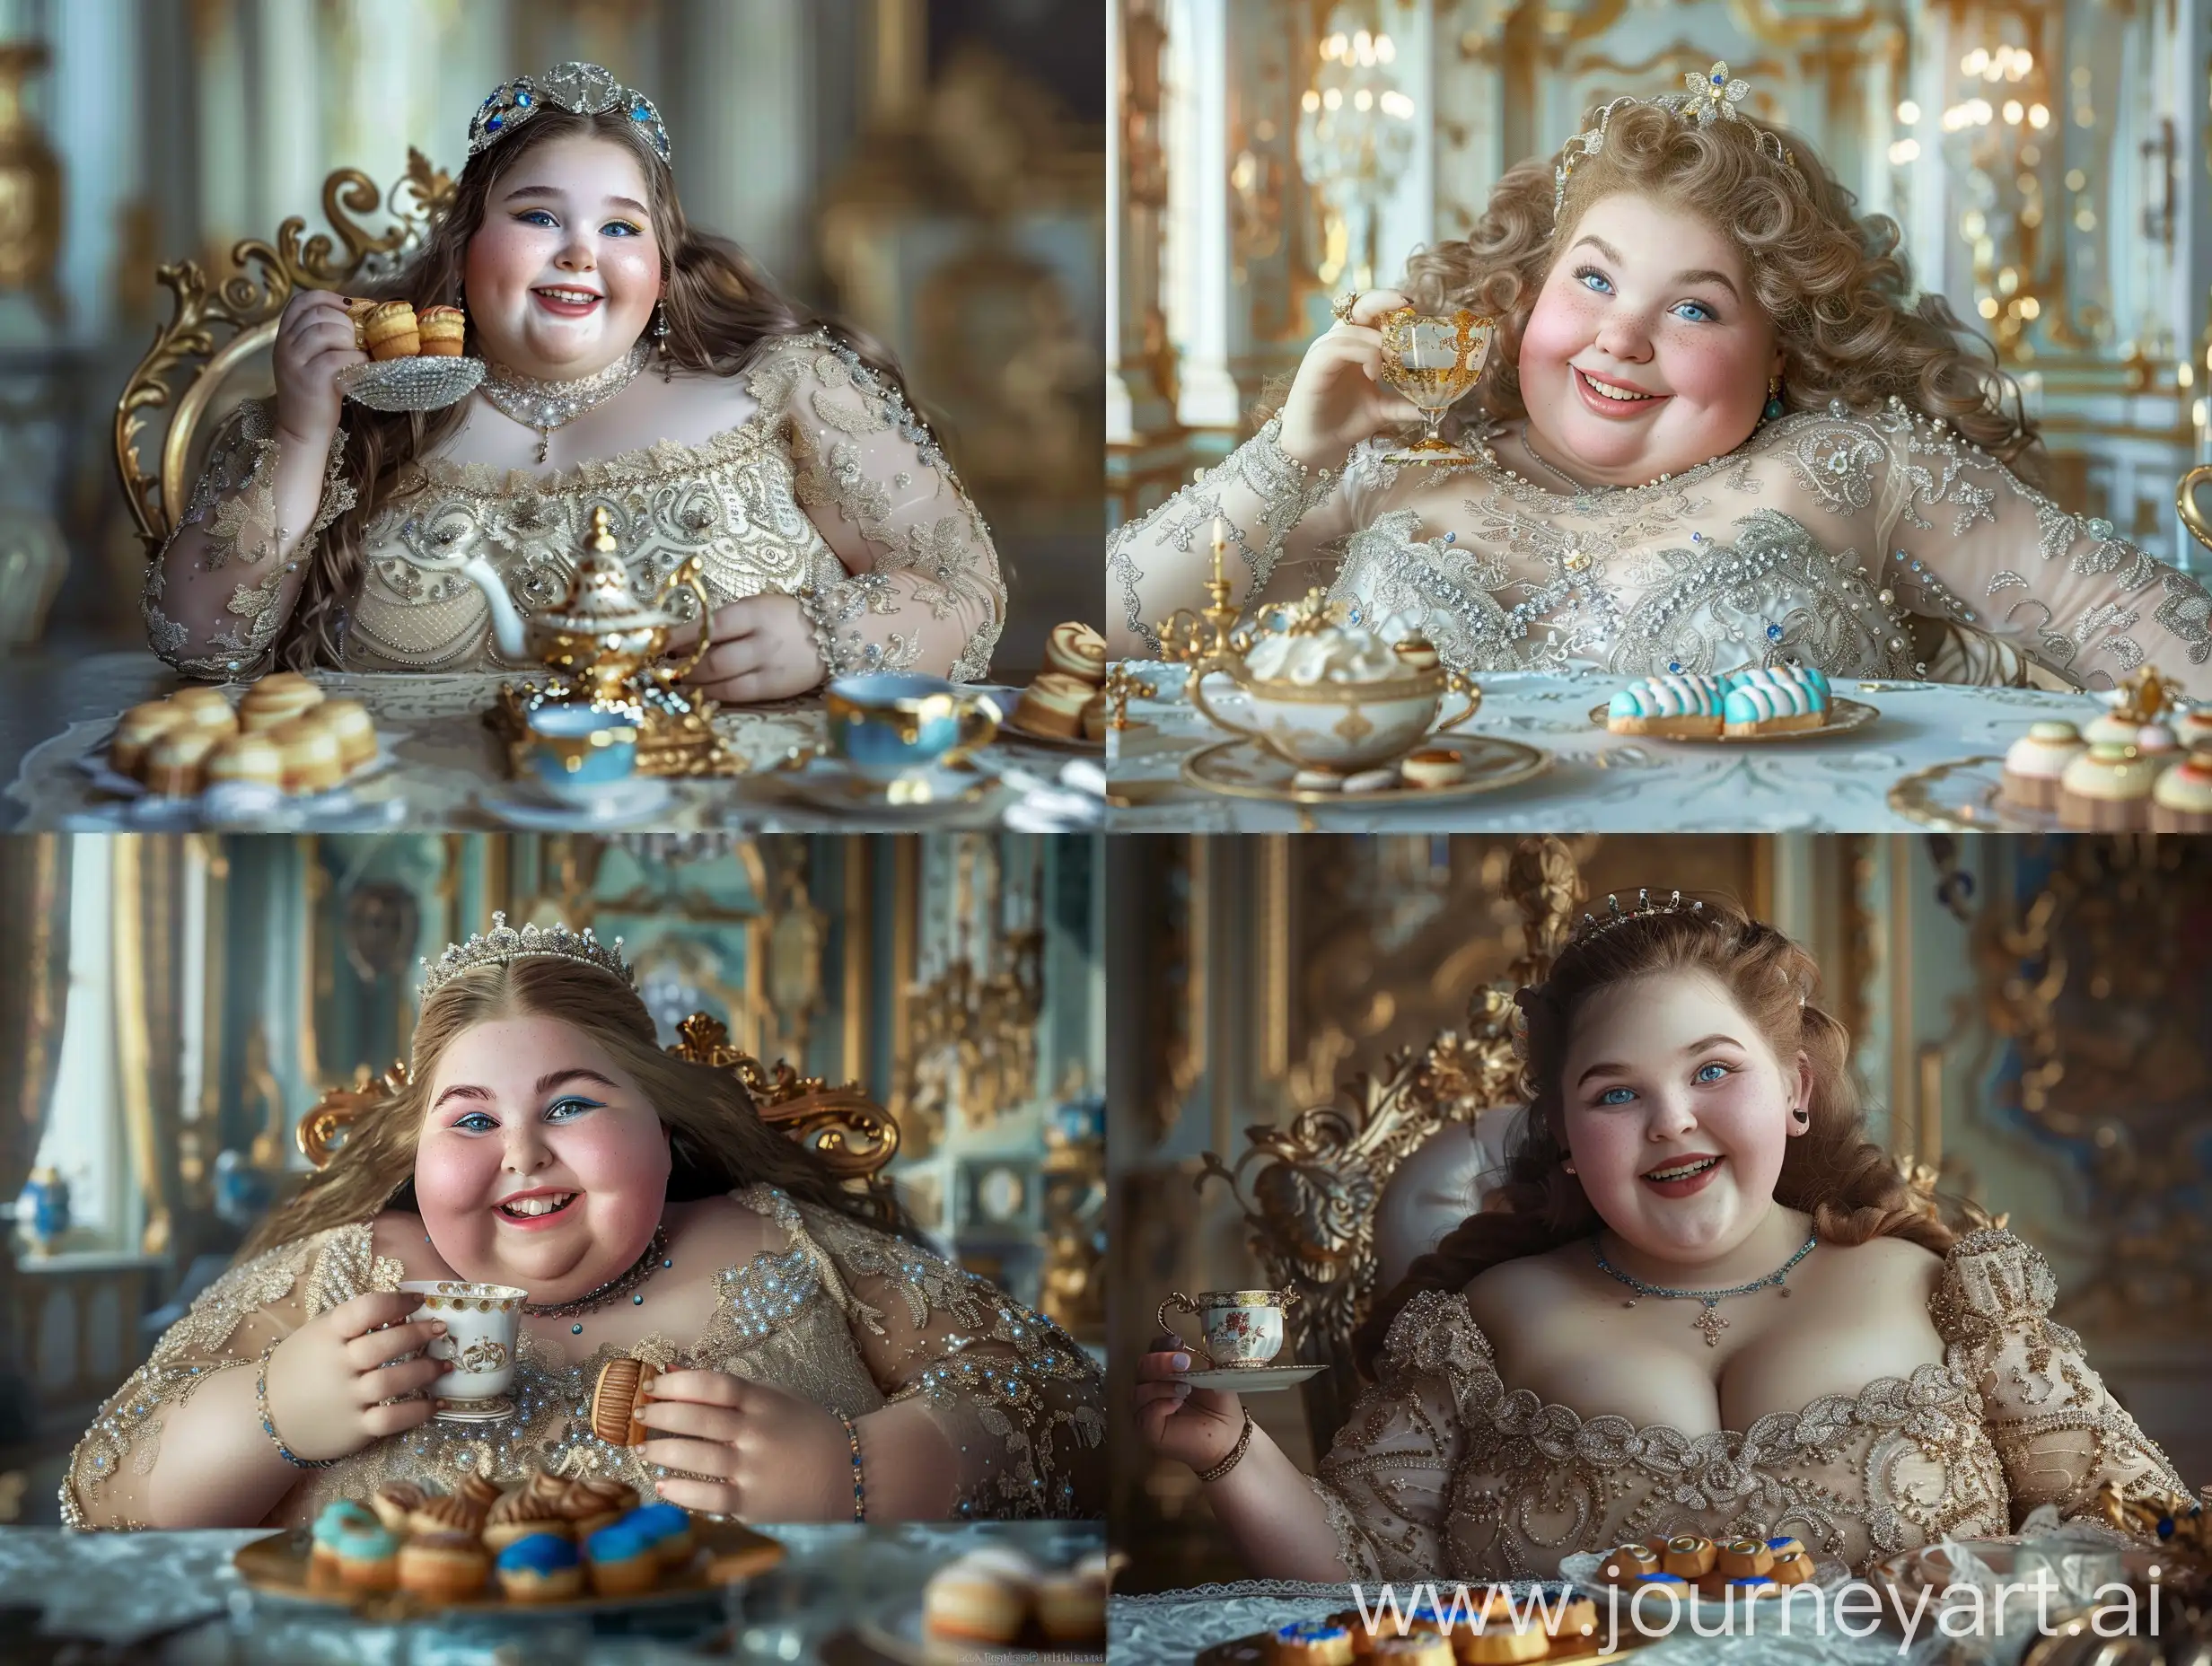 beautiful obese teenage girl in royal castle, smiling, drinking tea with eclairs, sitting at table, beaded lace dress, fat arms, round cheeks, double chin, obese, stunningly beautiful fat face, big grey-blue eyes, thick black eyeliner, blue eye-shadows, mascara, pale skin, elite jewelry, long hair, hyper realistic